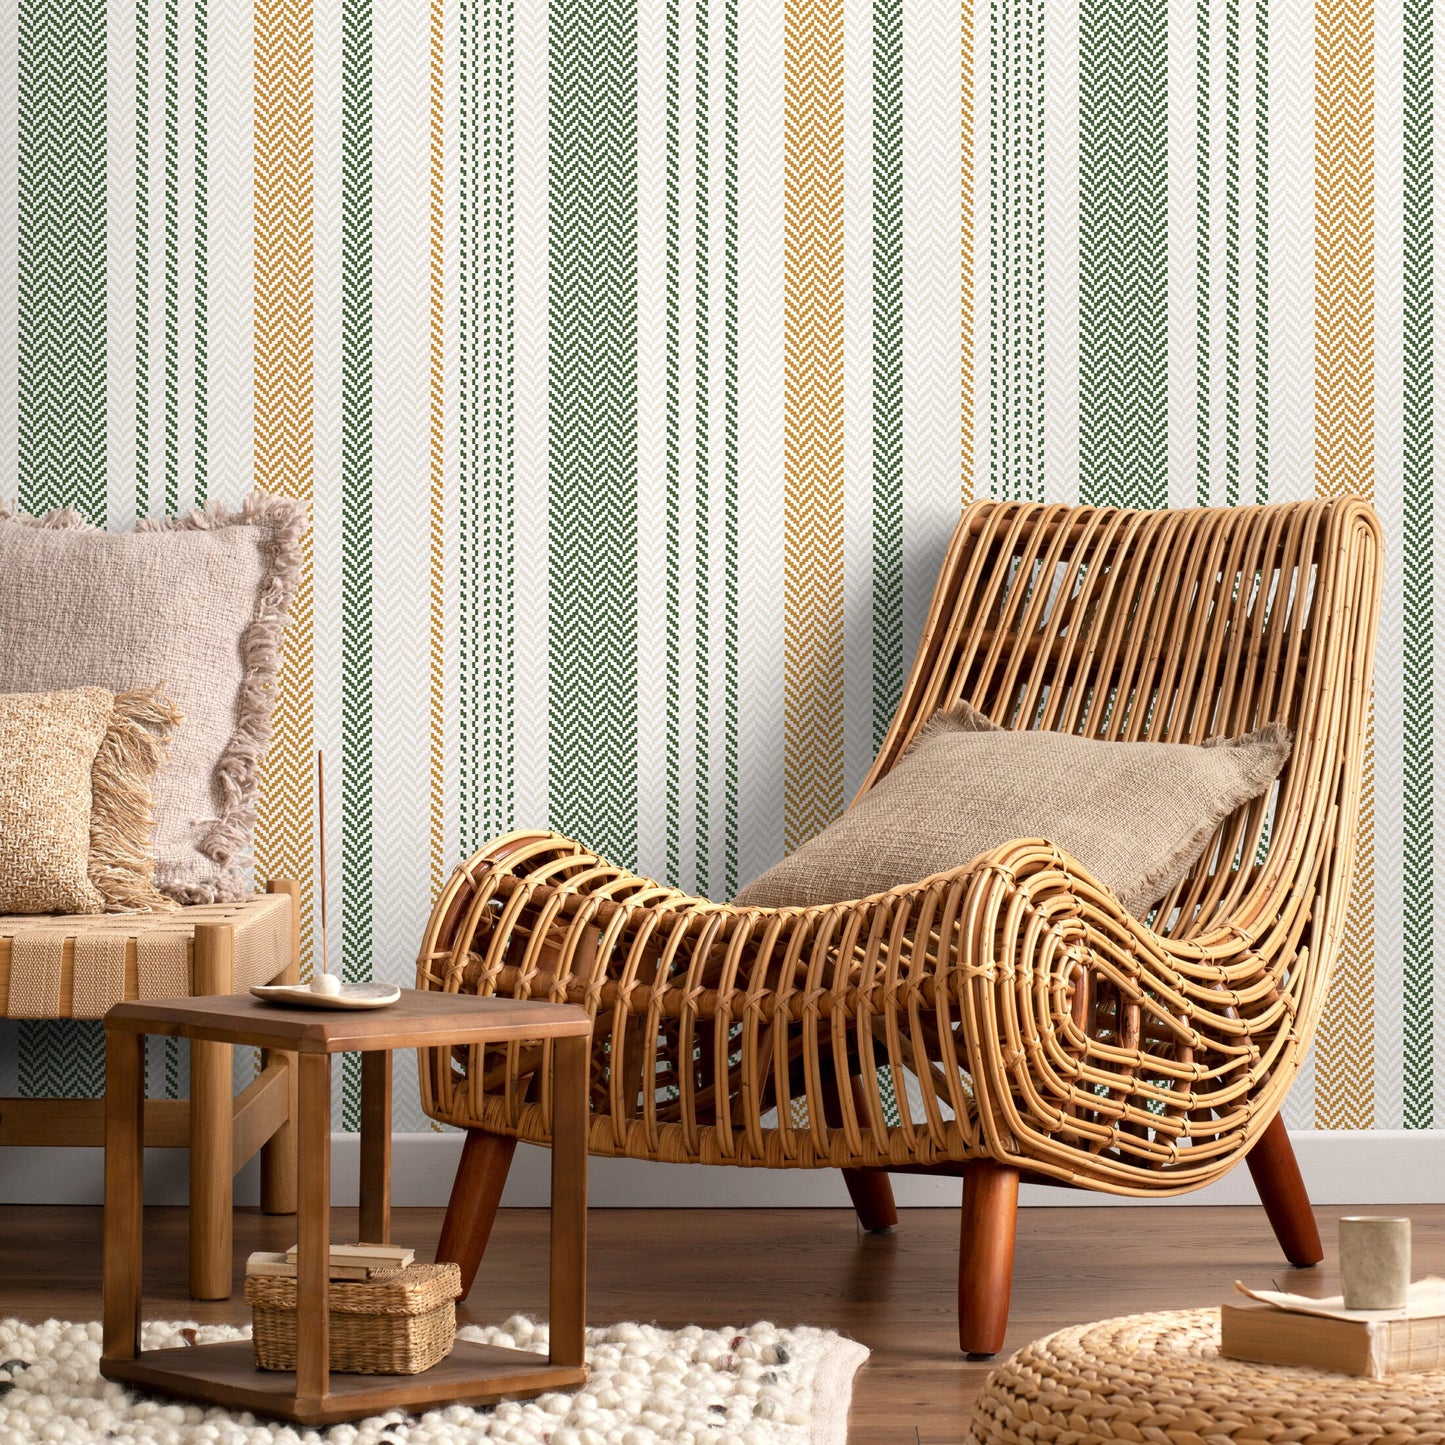 Farmhouse Striped Wallpaper Chevron Wallpaper Peel and Stick and Traditional Wallpaper - D804